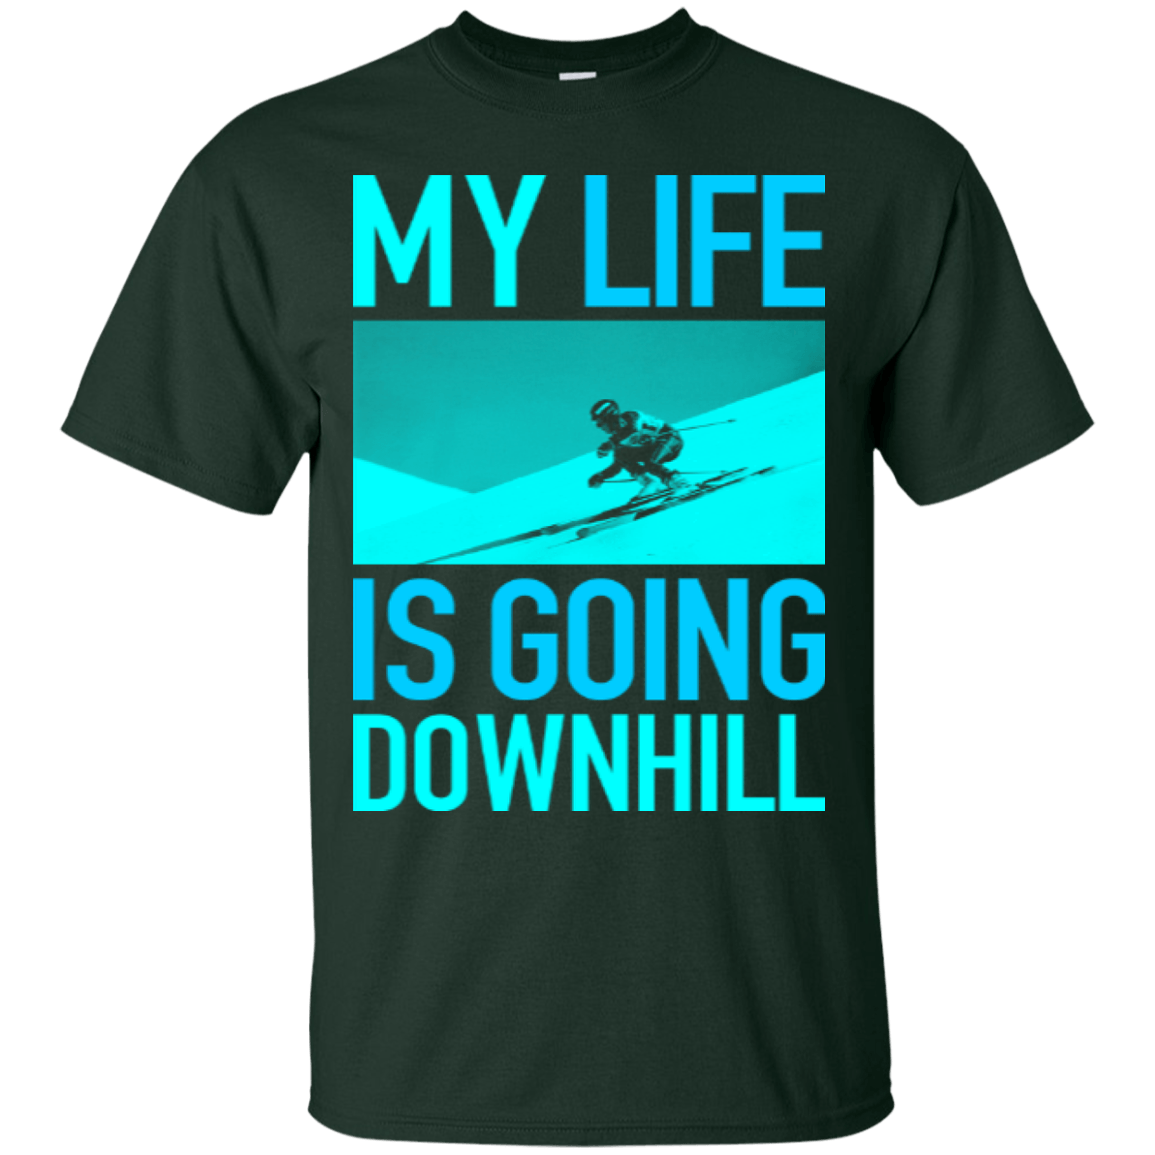 My Life Is Going Downhill Tees - Powderaddicts